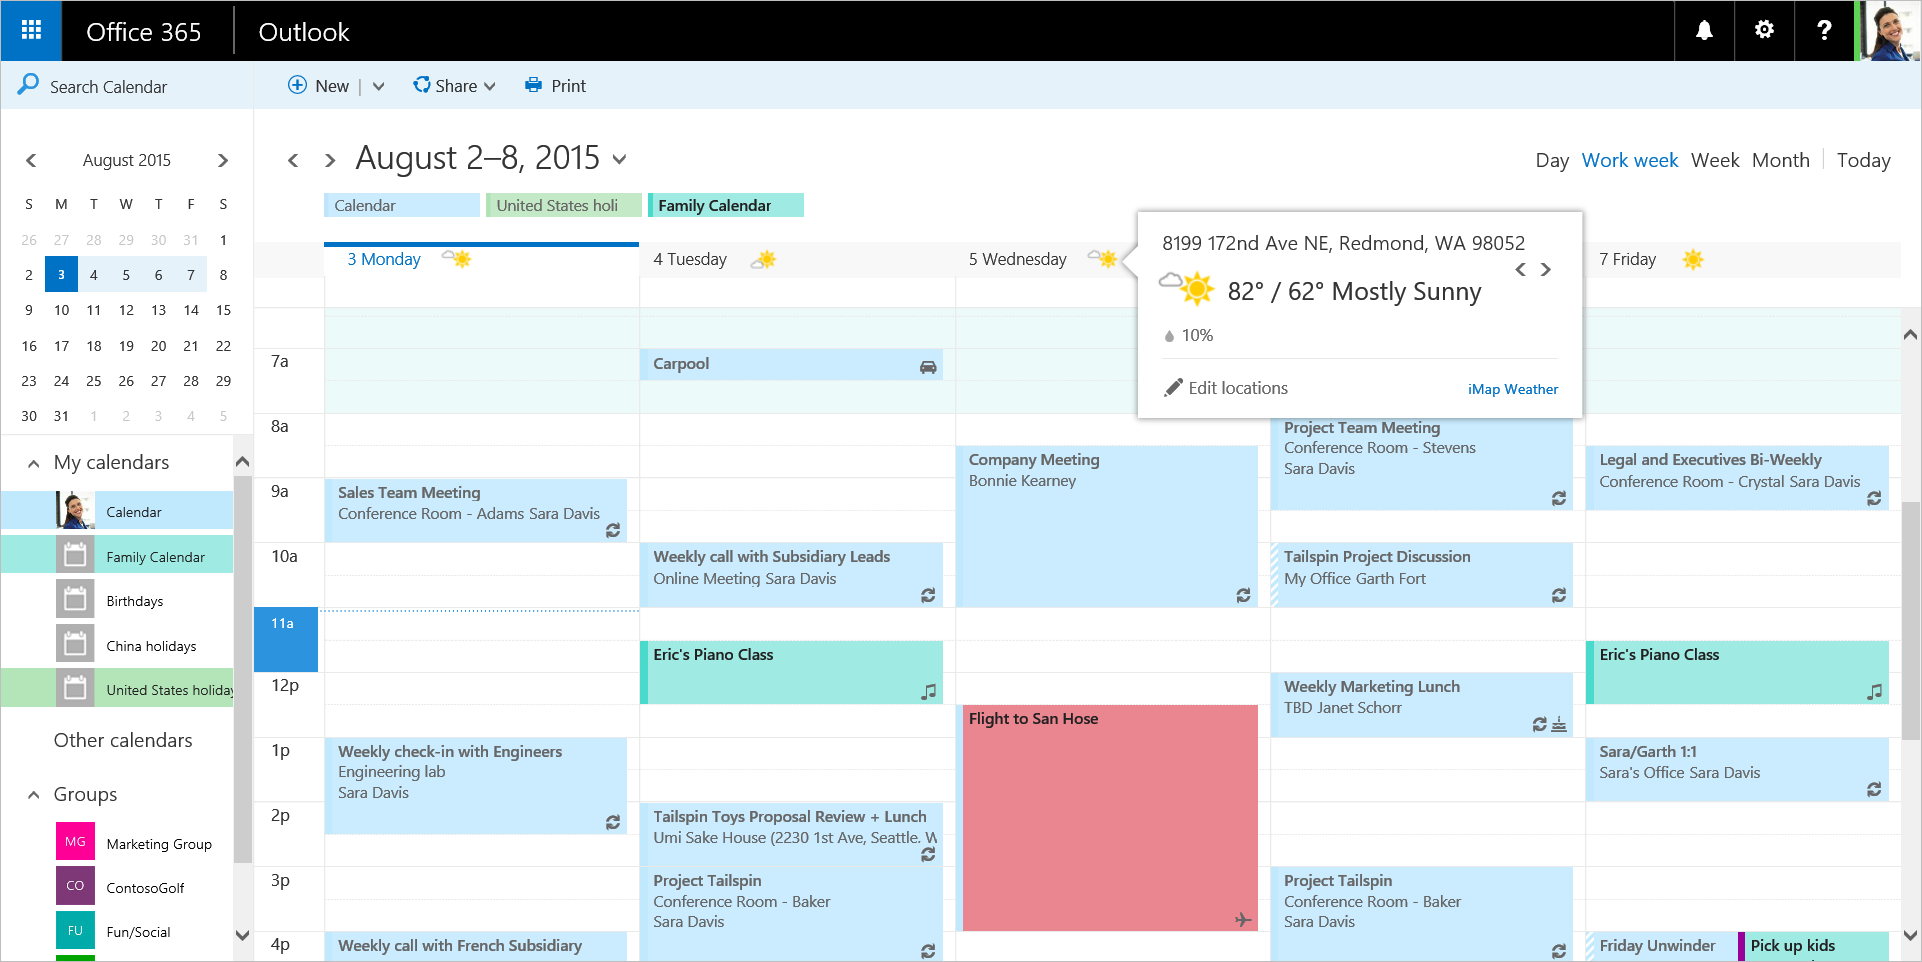 Office 365's Outlook web interface spruces up with new features and a